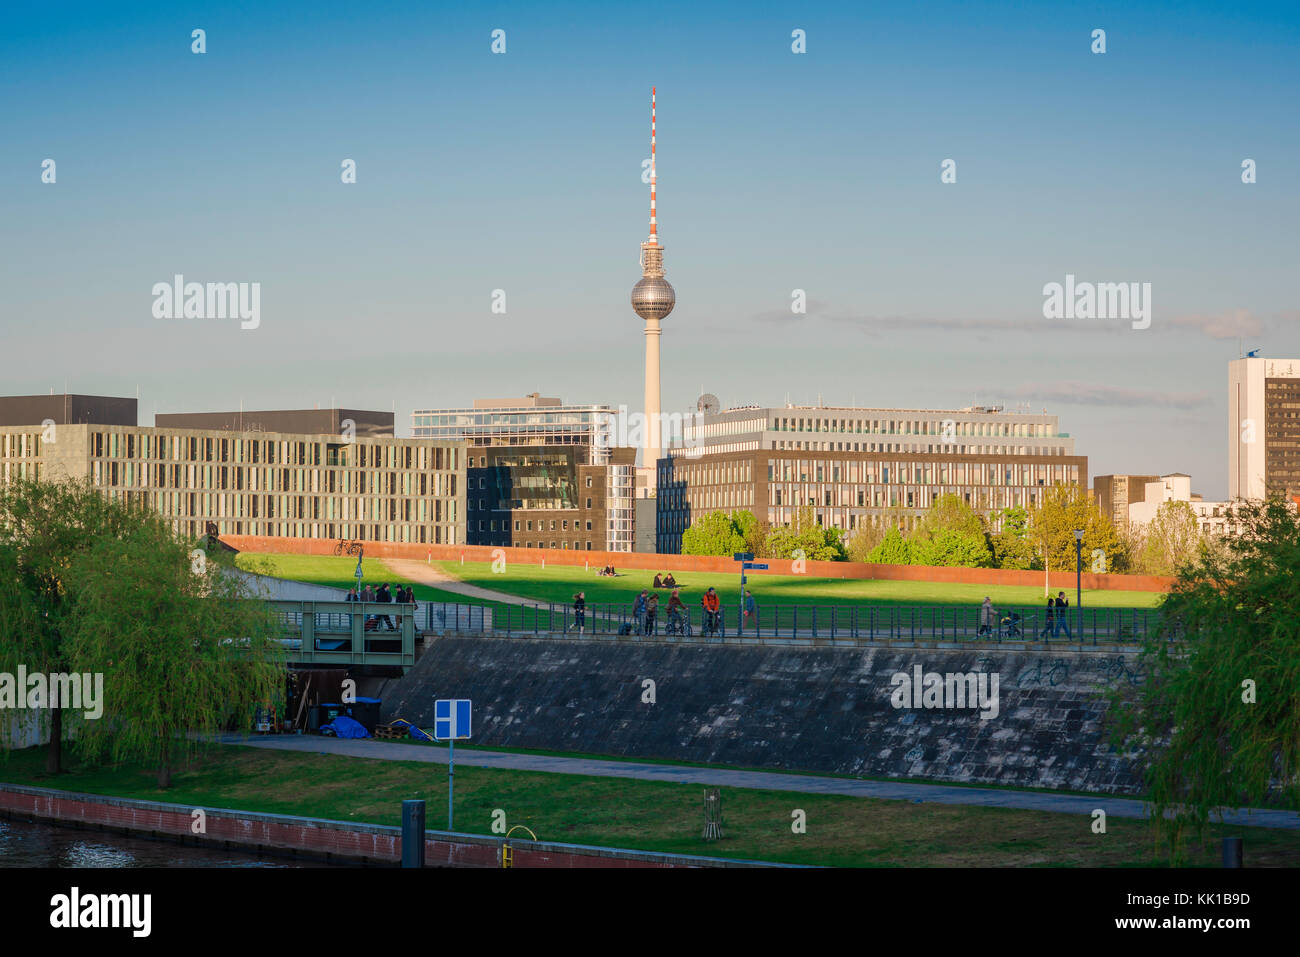 Berlin Germany, view of the Regierungsviertel - government quarter - in Berlin with the Spreebogen park in the foreground. Stock Photo